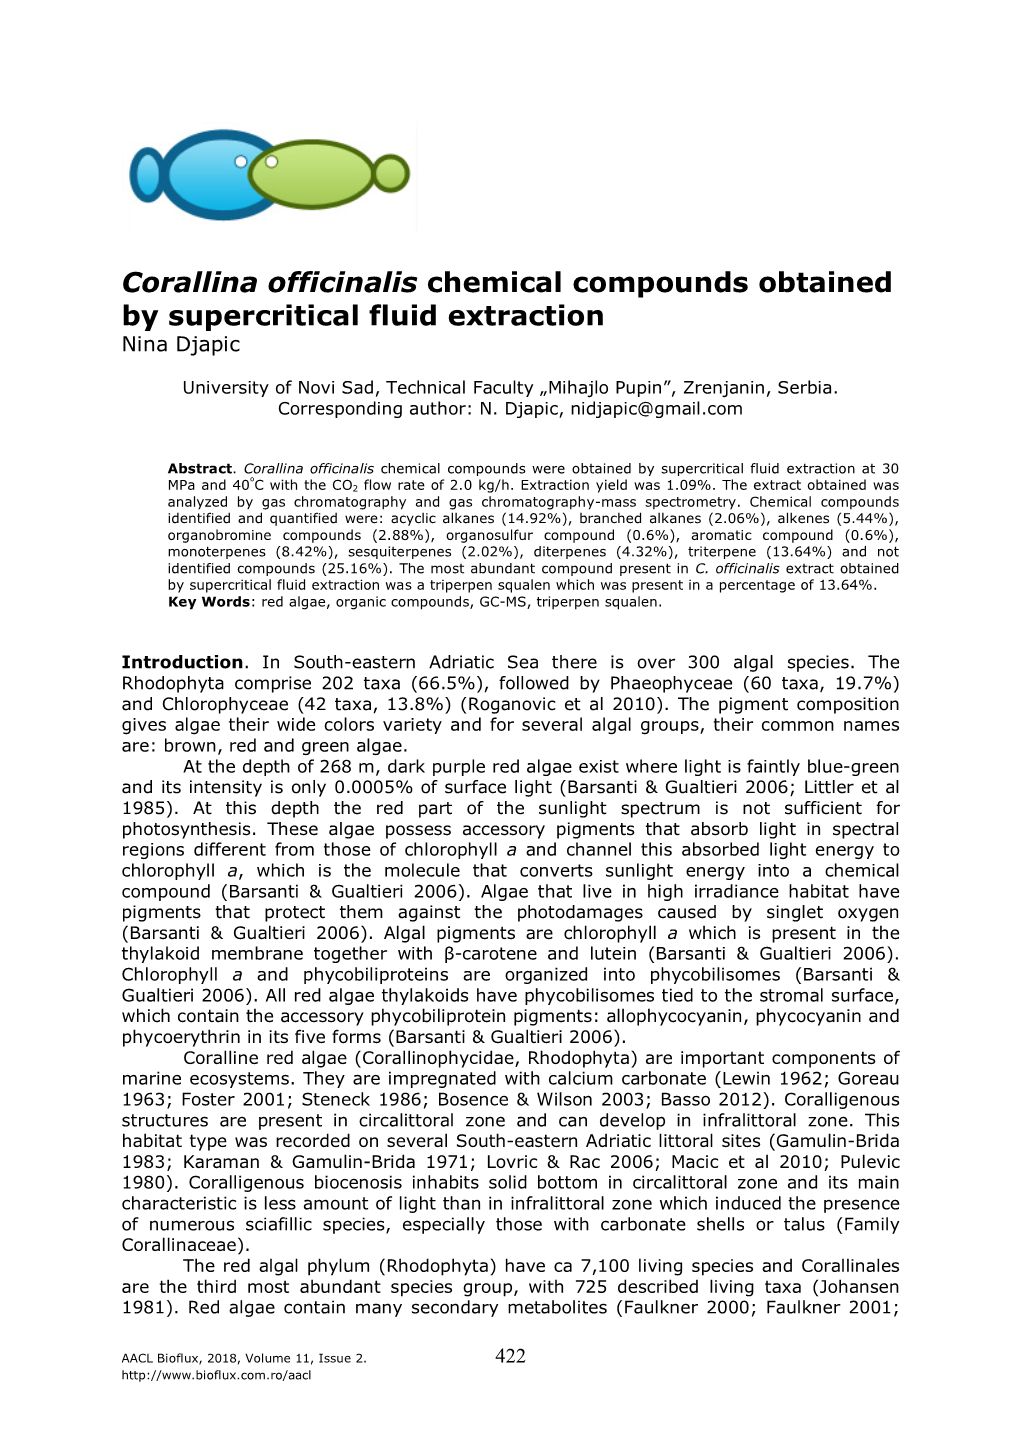 Djapic N., 2018 Corallina Officinalis Chemical Compounds Obtained by Supercritical Fluid Extraction